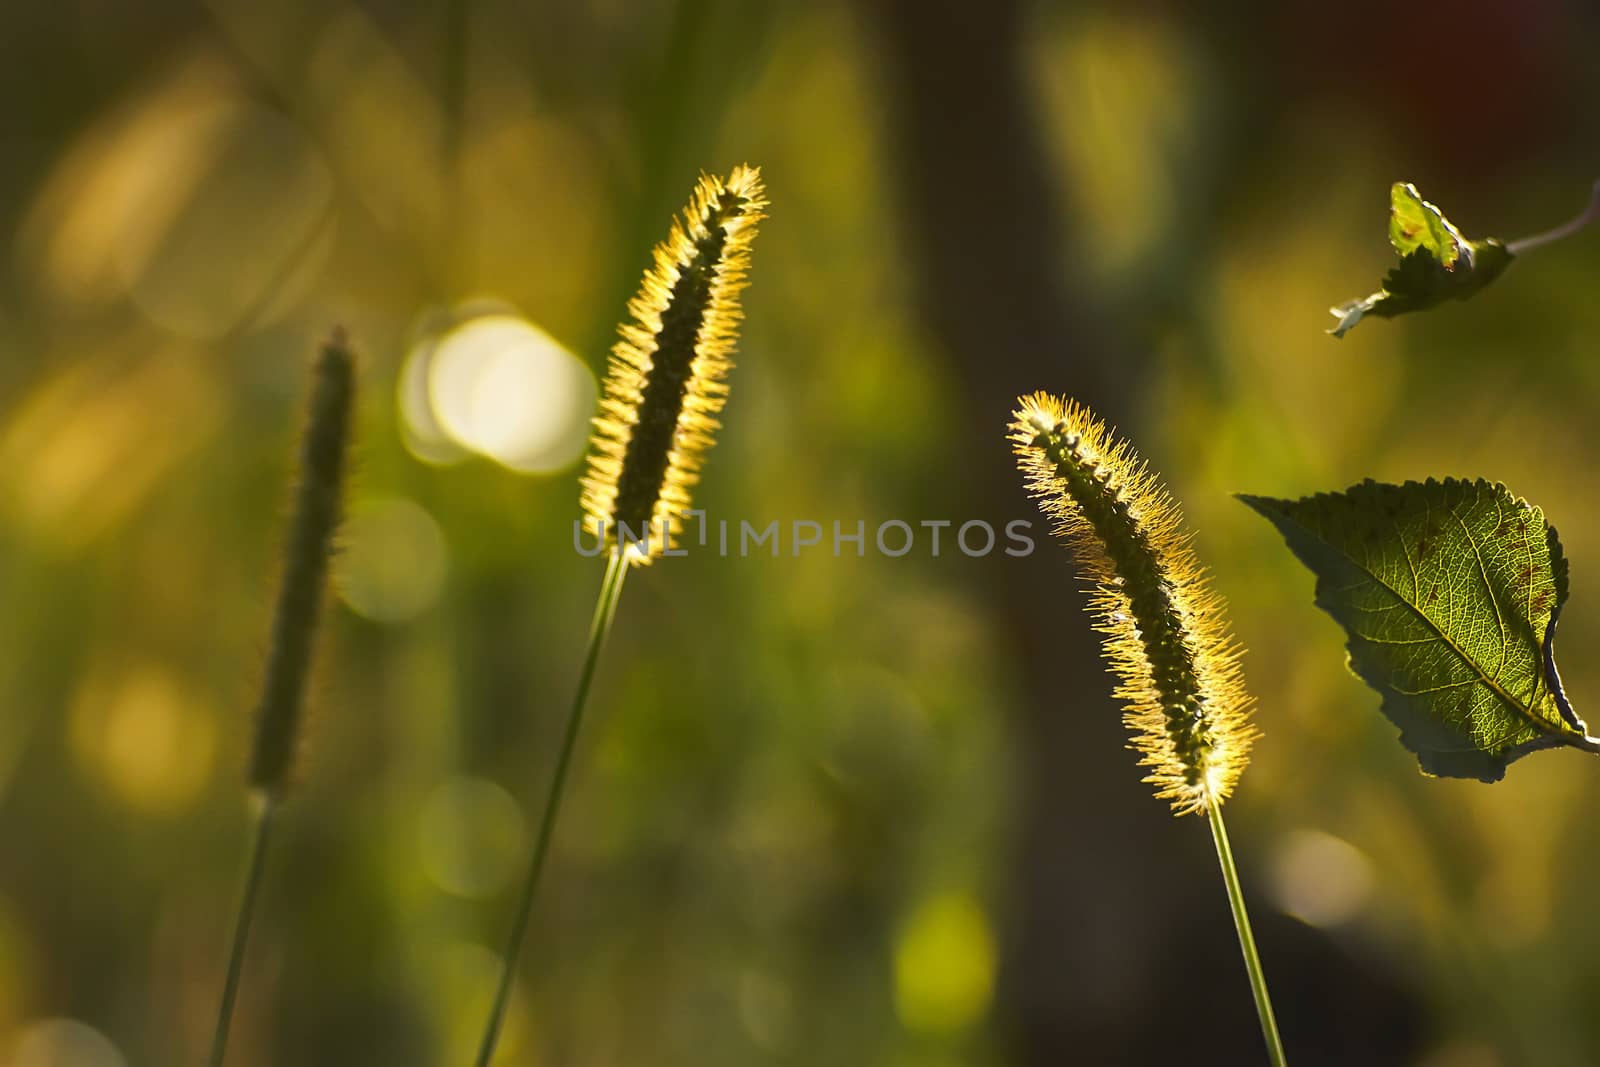 Two ears, grassy threads and dried leaf in macro shot in backlight at sunset. Autumn natural shots.